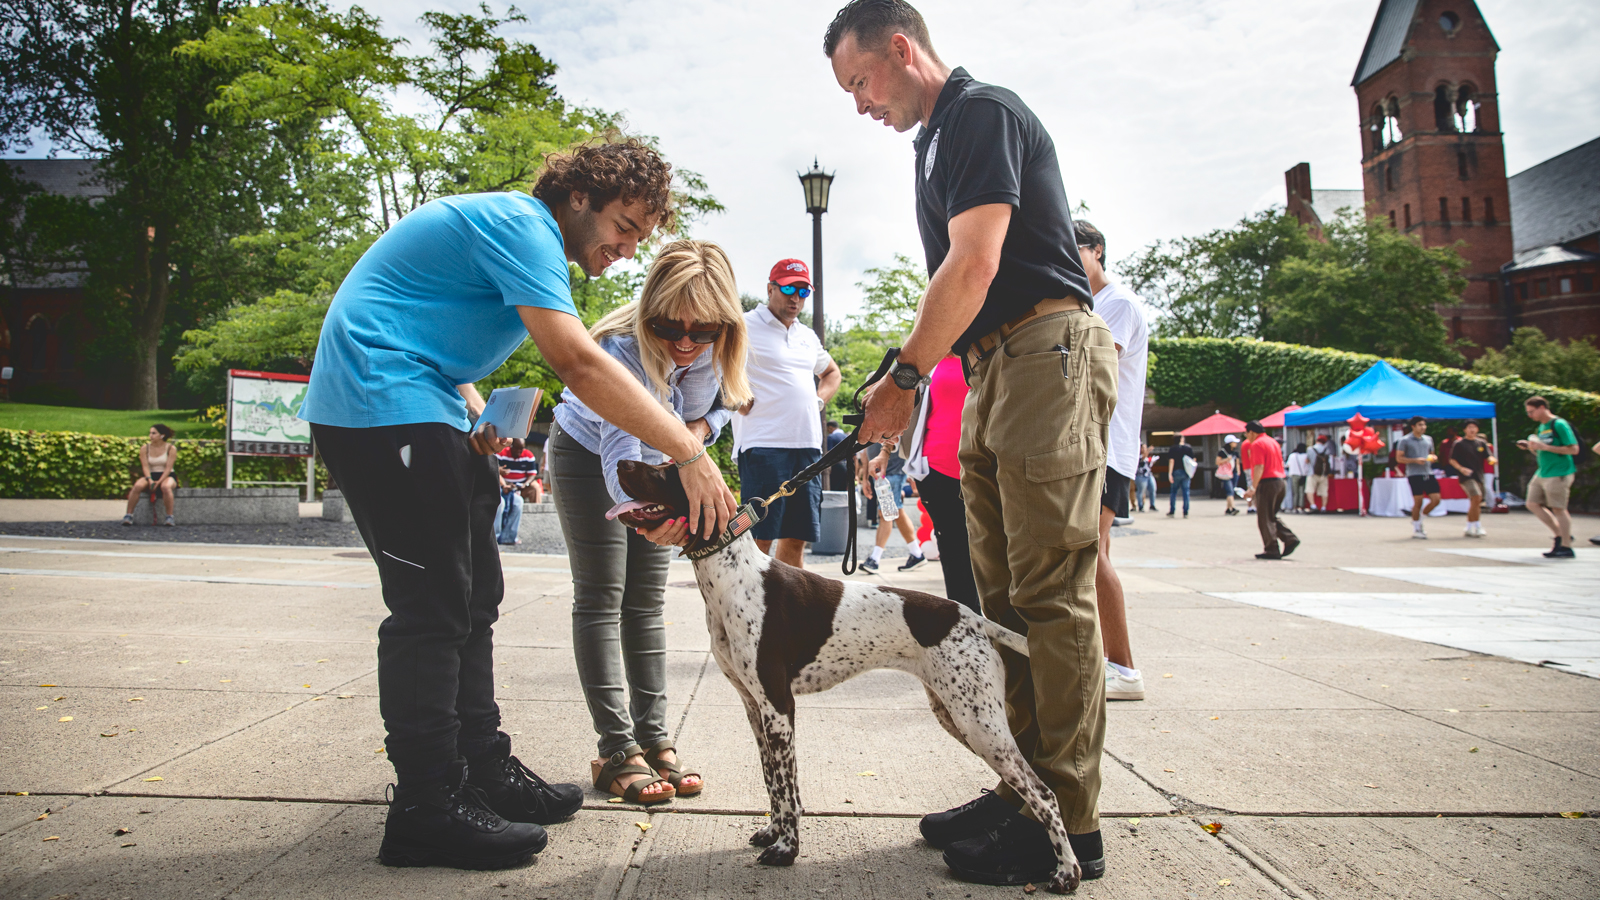 A man holds a brown and white dog on a leash while another man and a woman bend over to pet the dog.